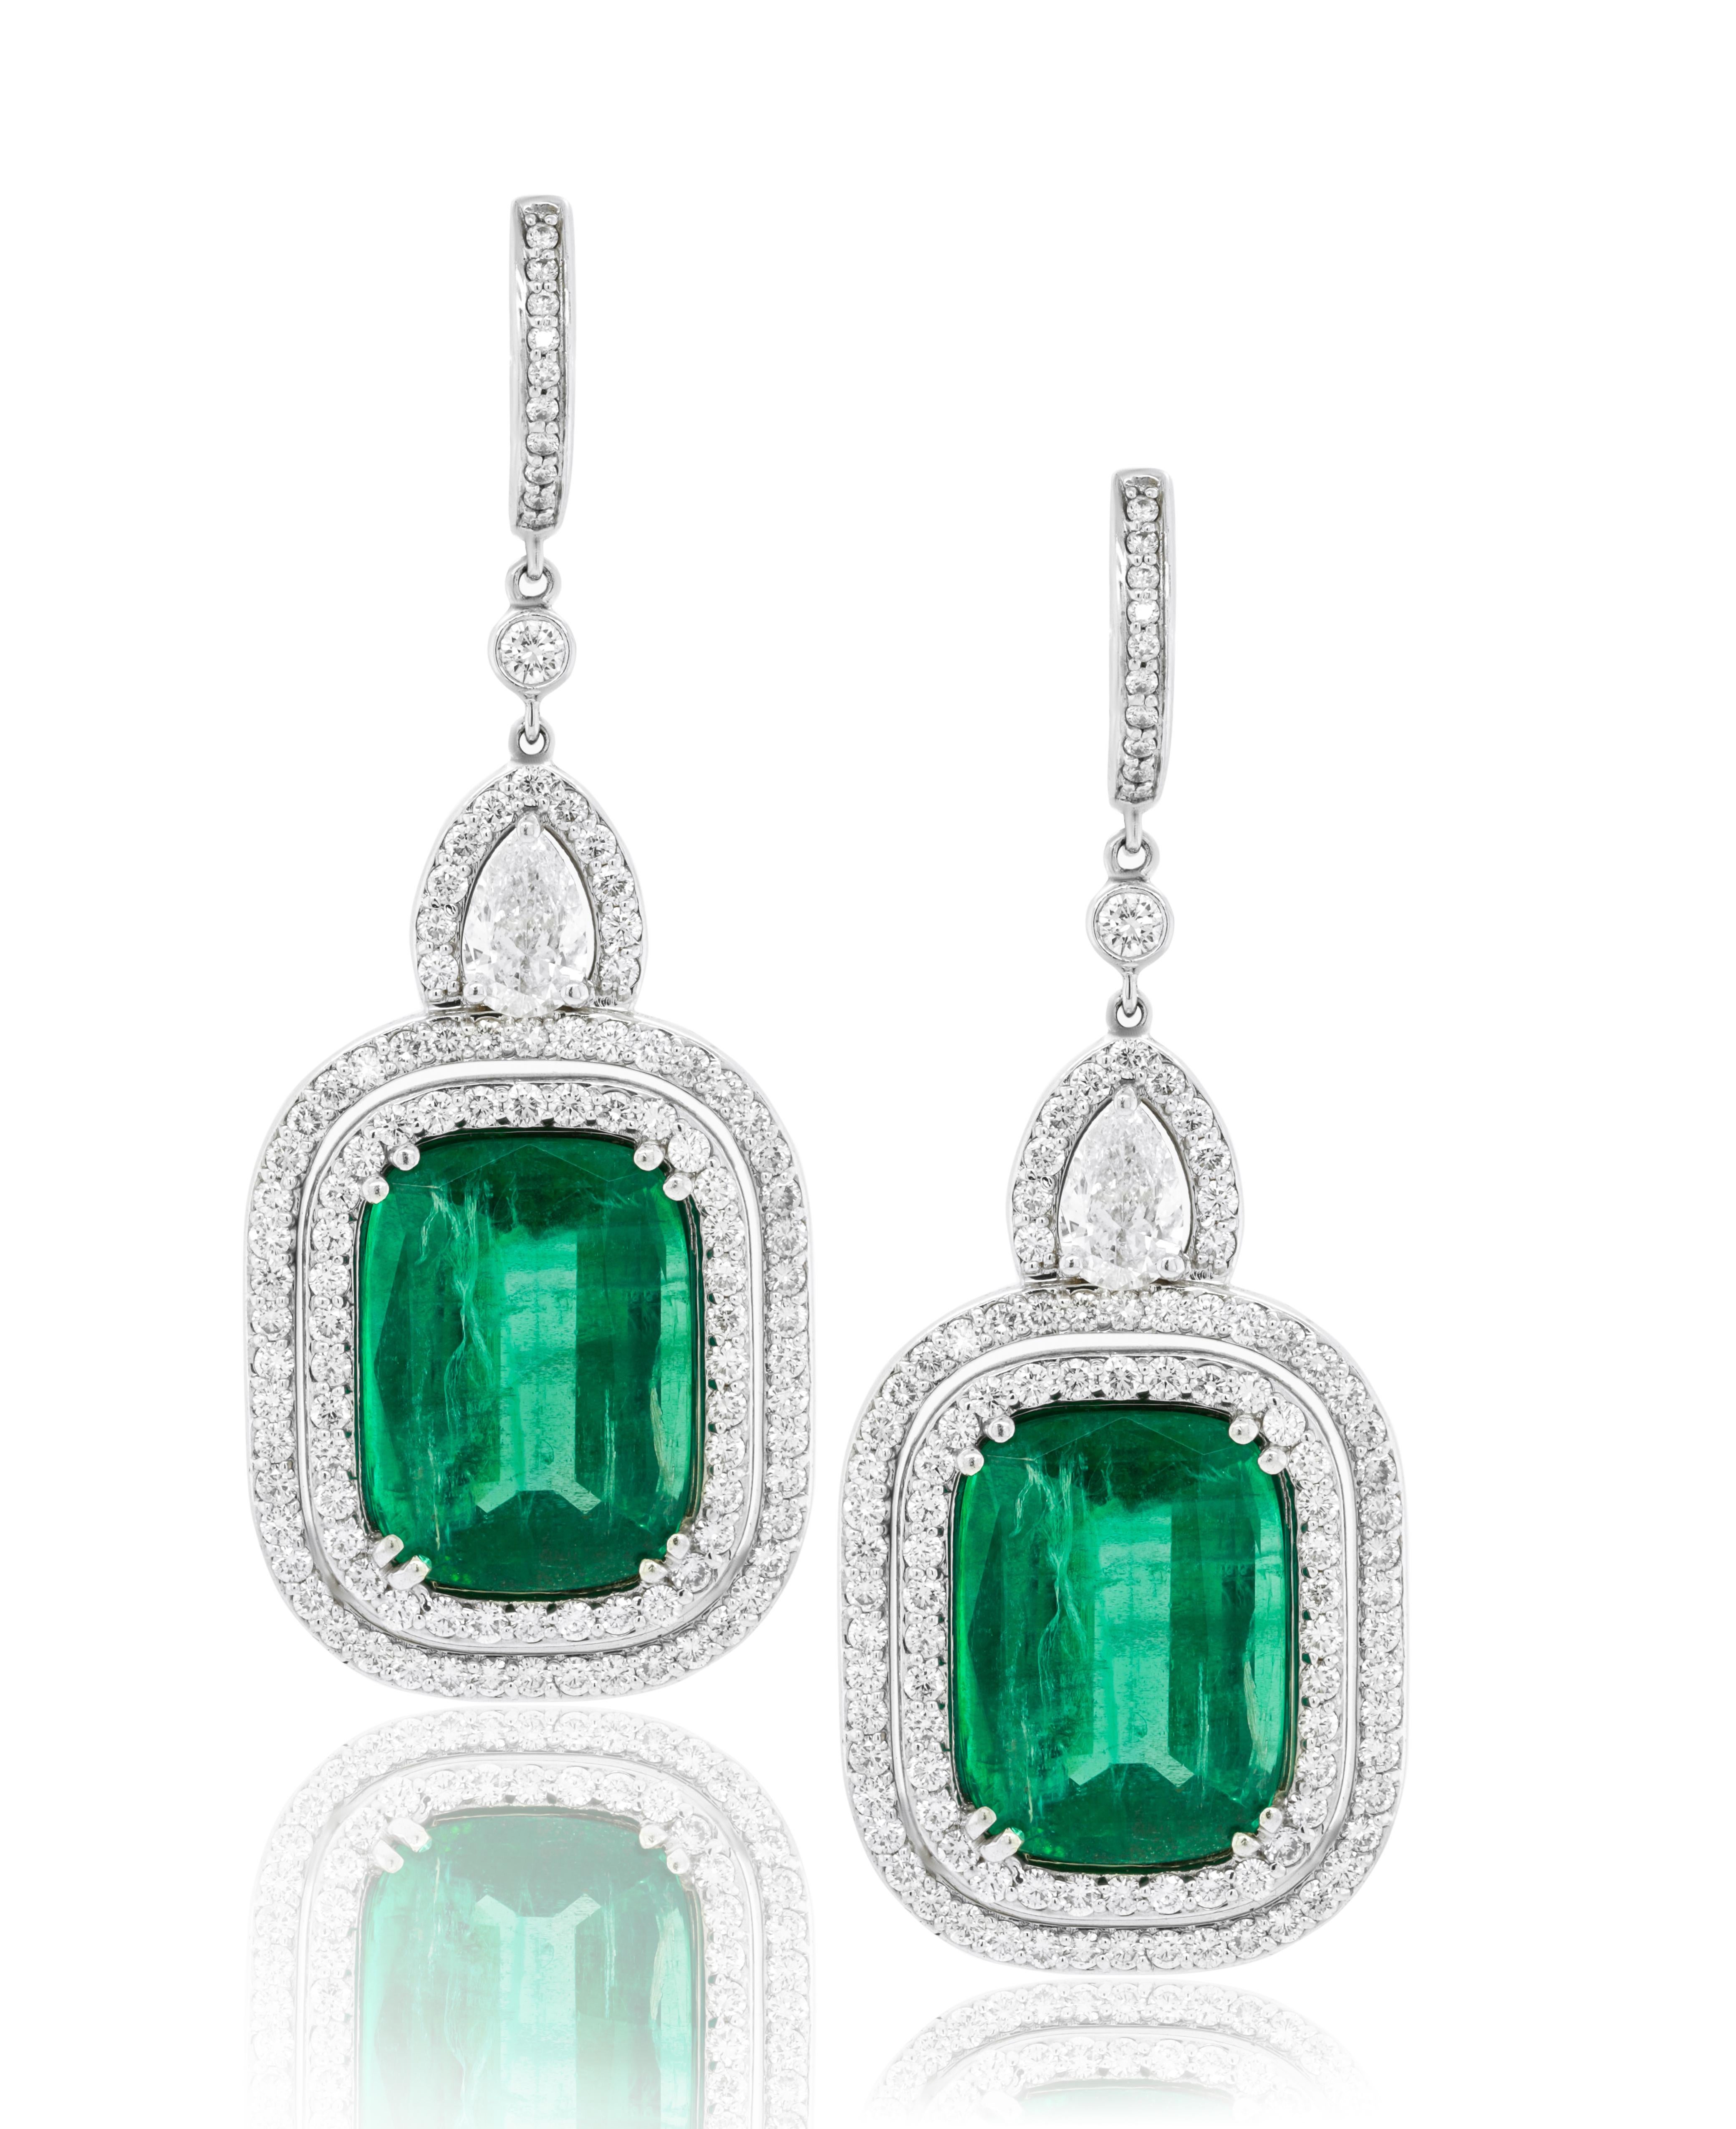 18kt white gold, emerald and diamond earrings features 27.10 carats of GIA
Certified emeralds. surrounded by 3.50 carats of diamonds in a double halo design